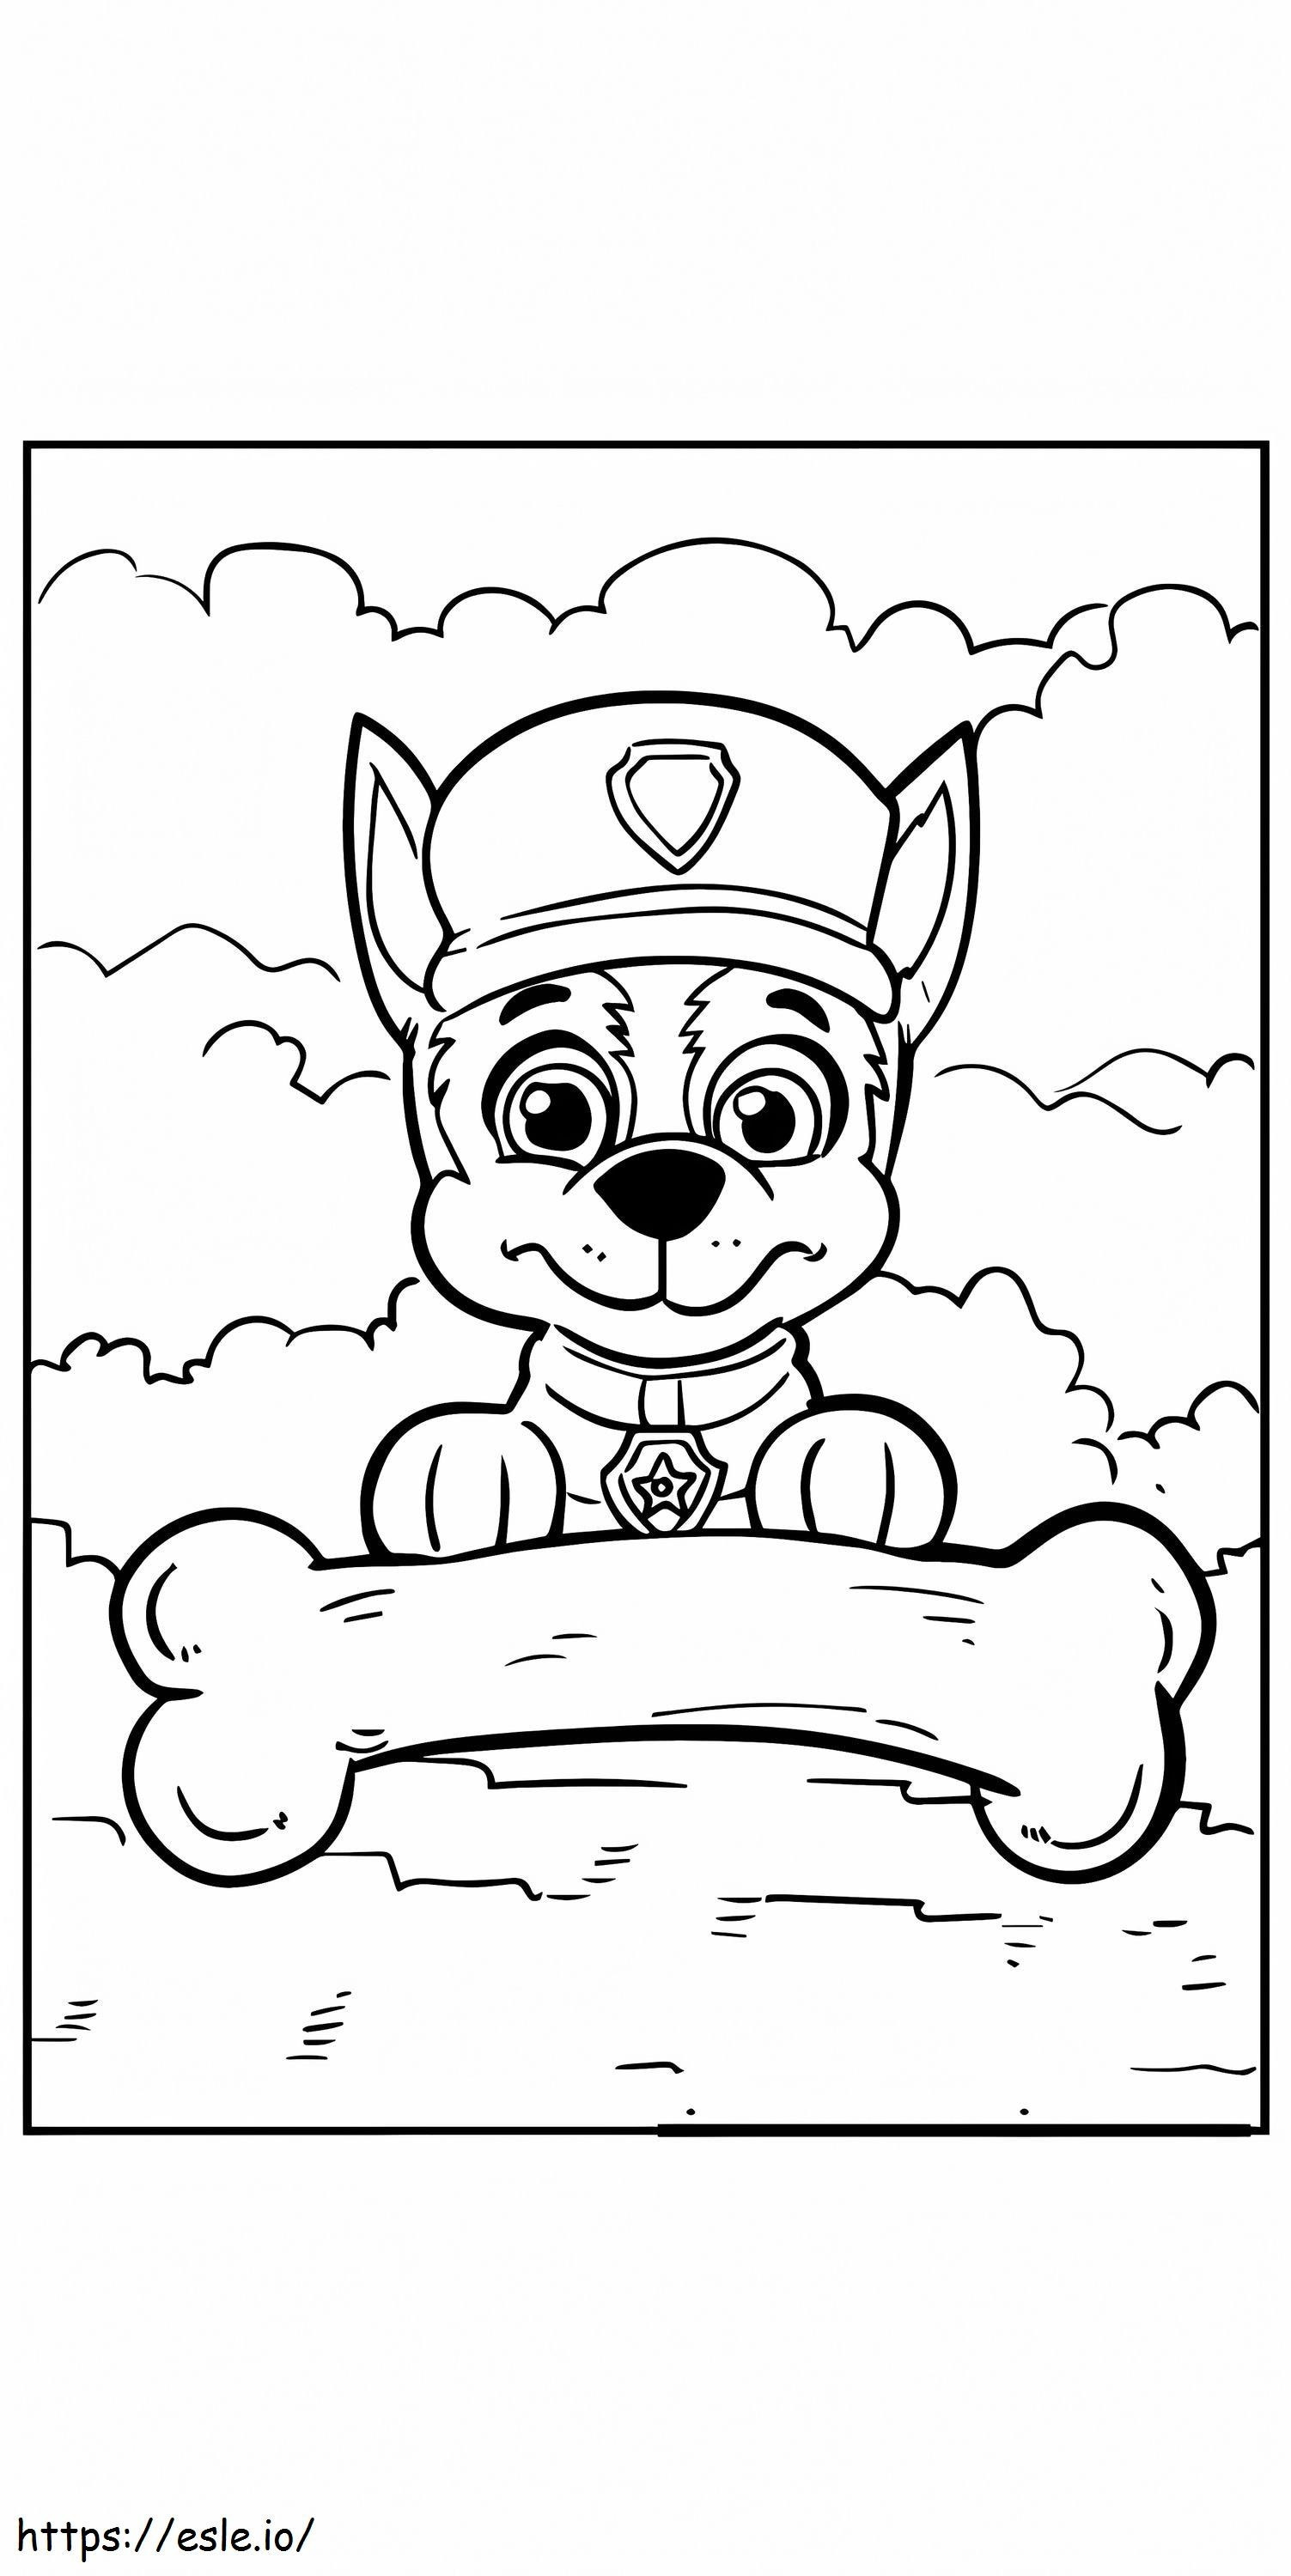 Coloriage Paw Patrol Ultimate Rescue Skye Marshall à imprimer dessin